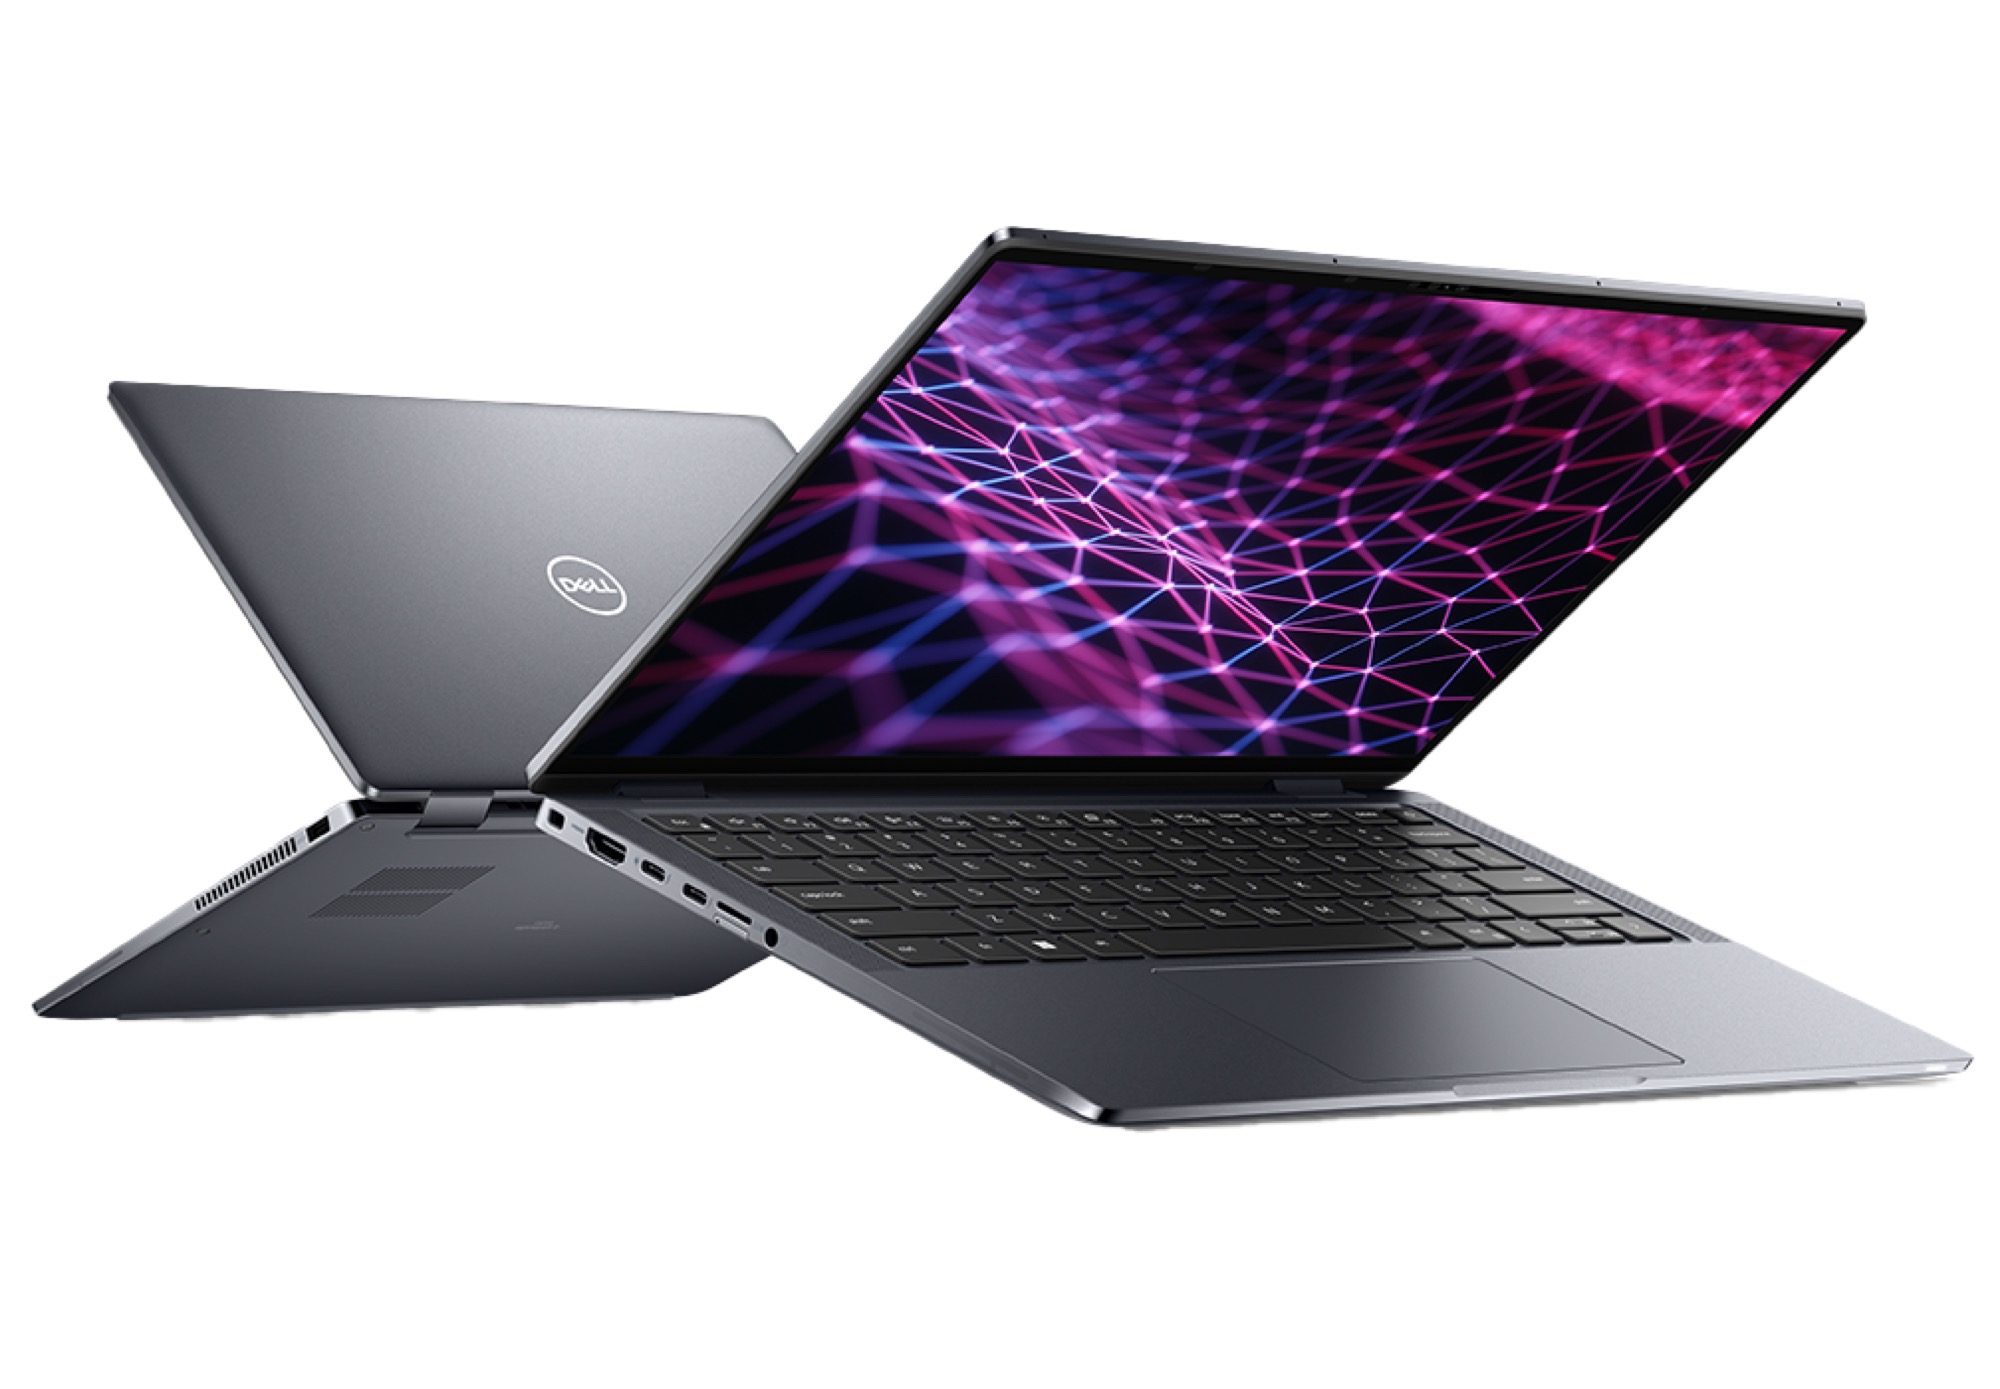 Dell Latitude 9430 review: A top-tier 2-in-1 laptop with best-in-class battery life